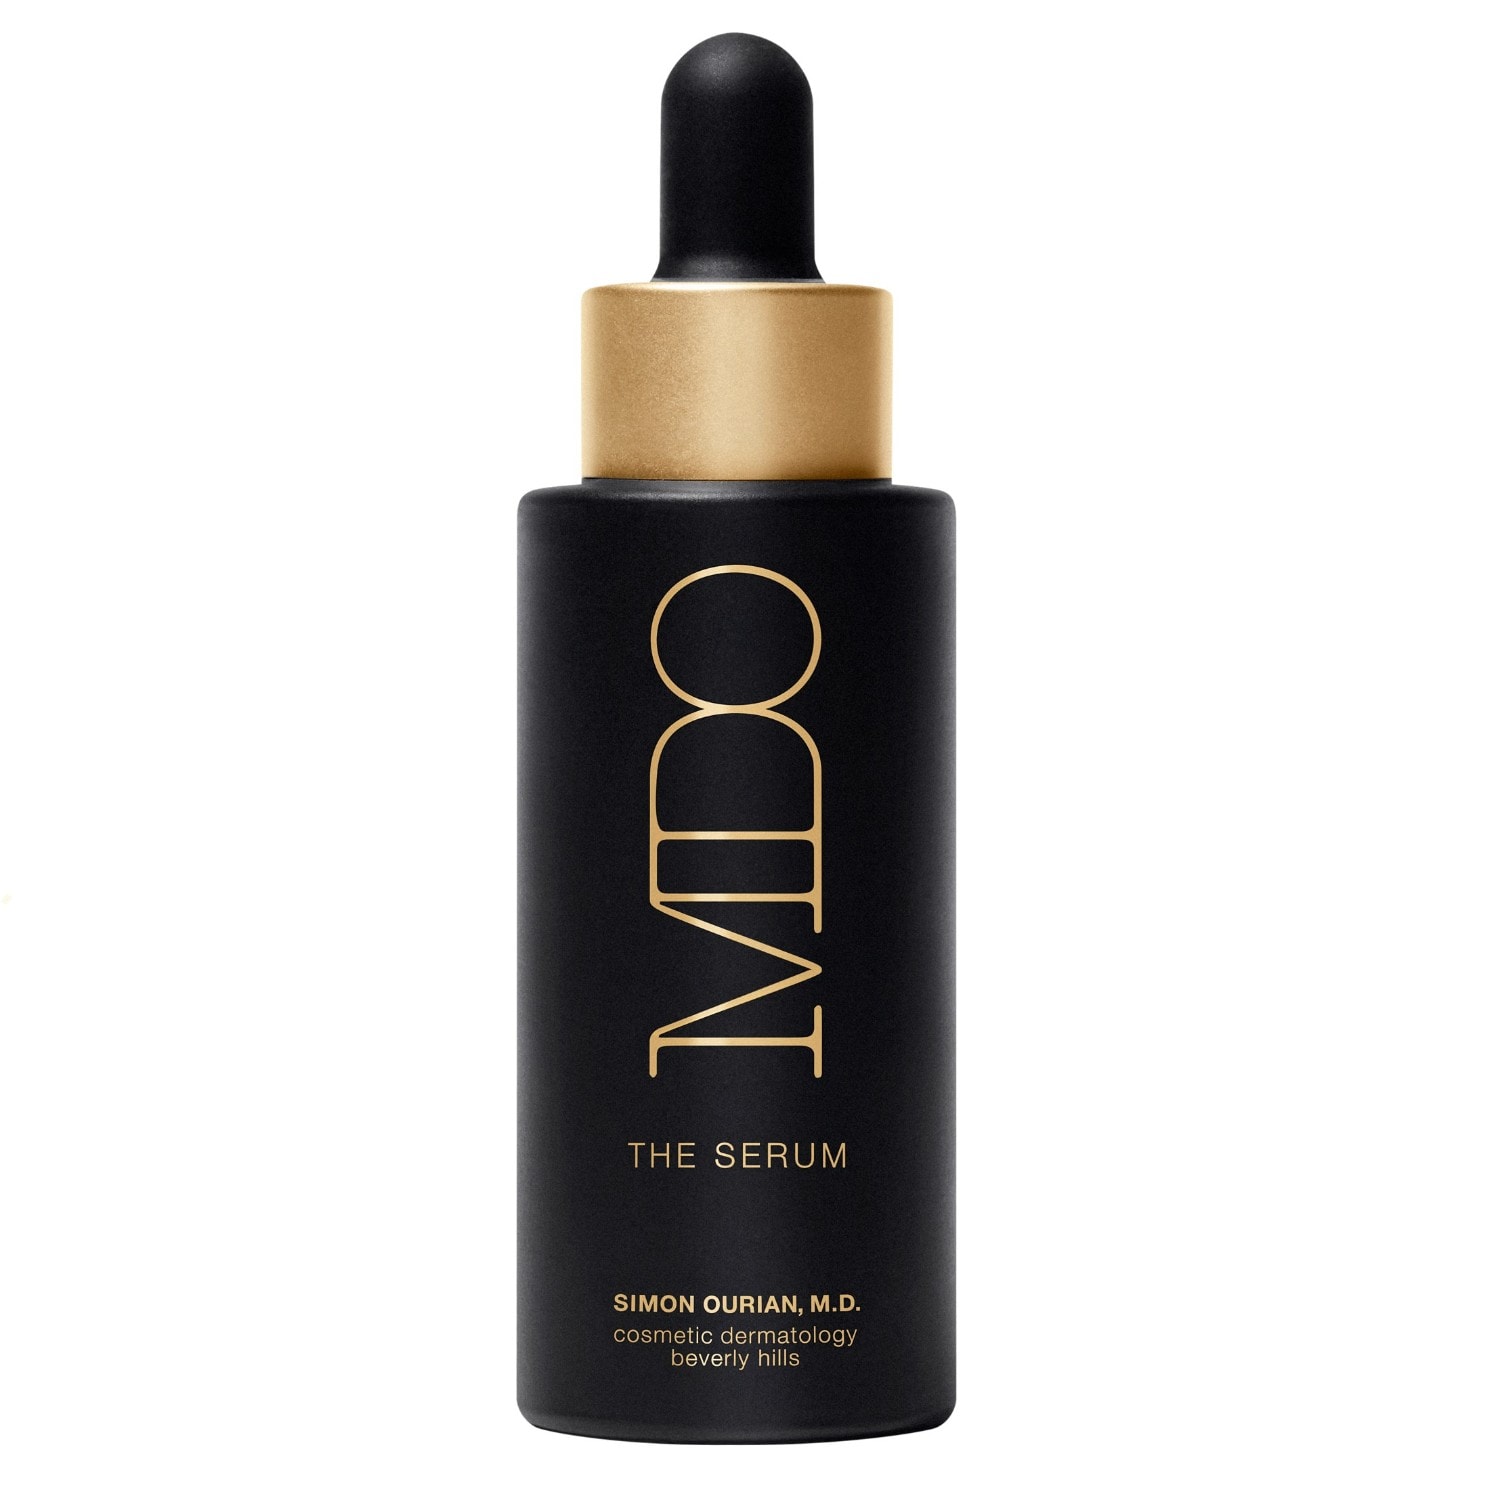 MDO by Simon Ourian M.D. The Serum, 